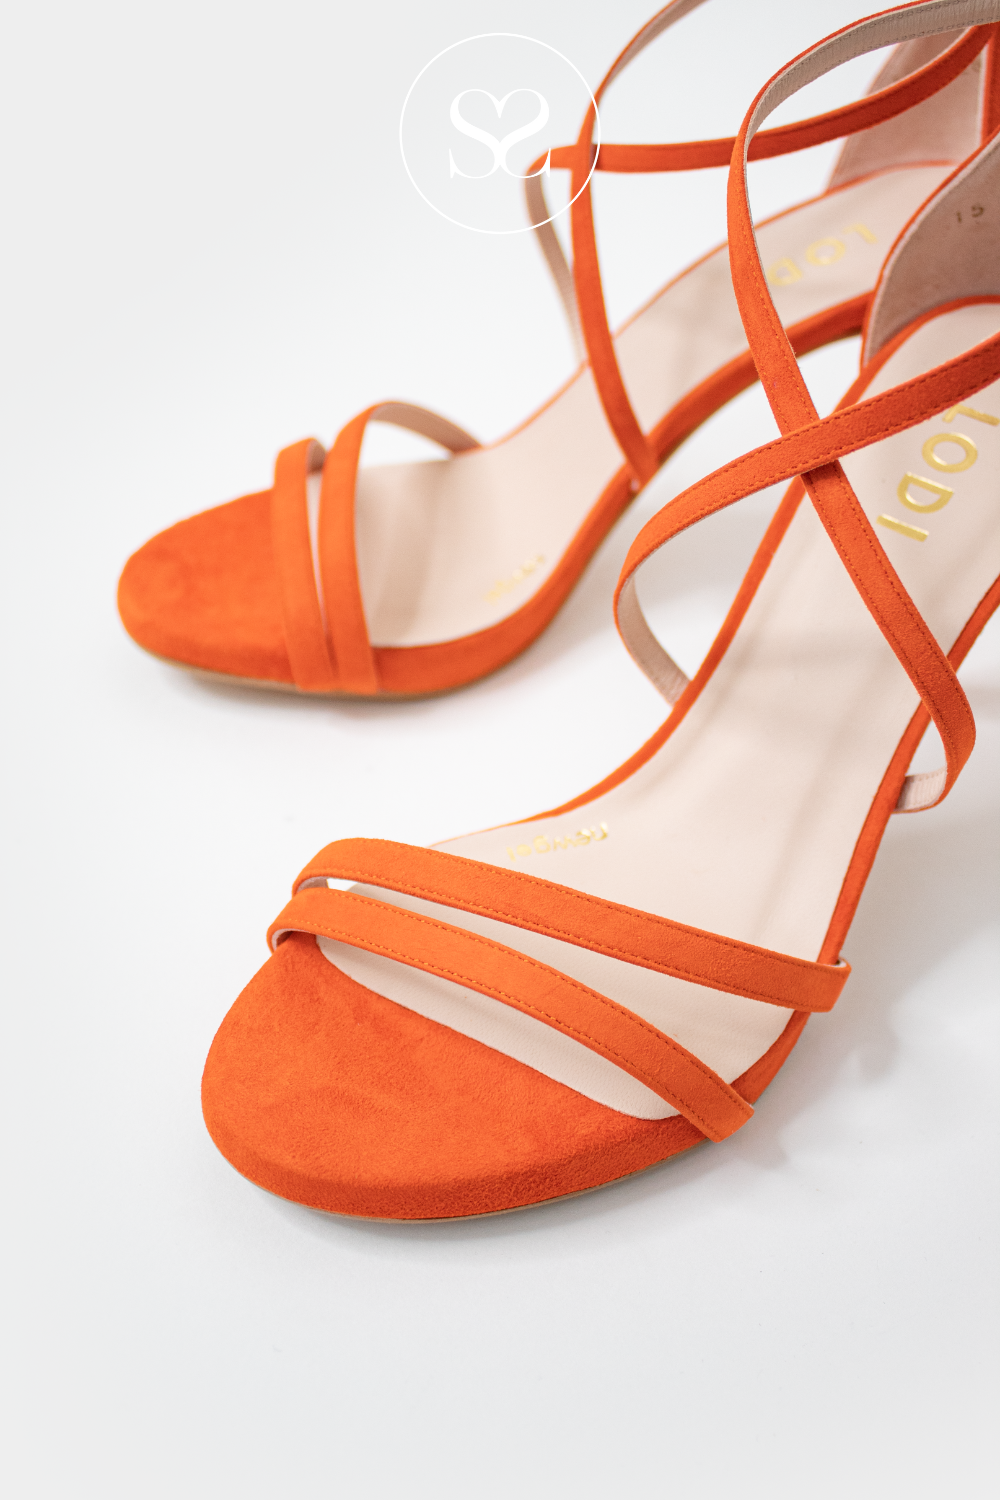 LODI INRIKO ORANGE SUEDE CRISS CROSS STRAPPY HIGH HEEL SANDALS WITH ADJUSTABLE ANKLE STRAP